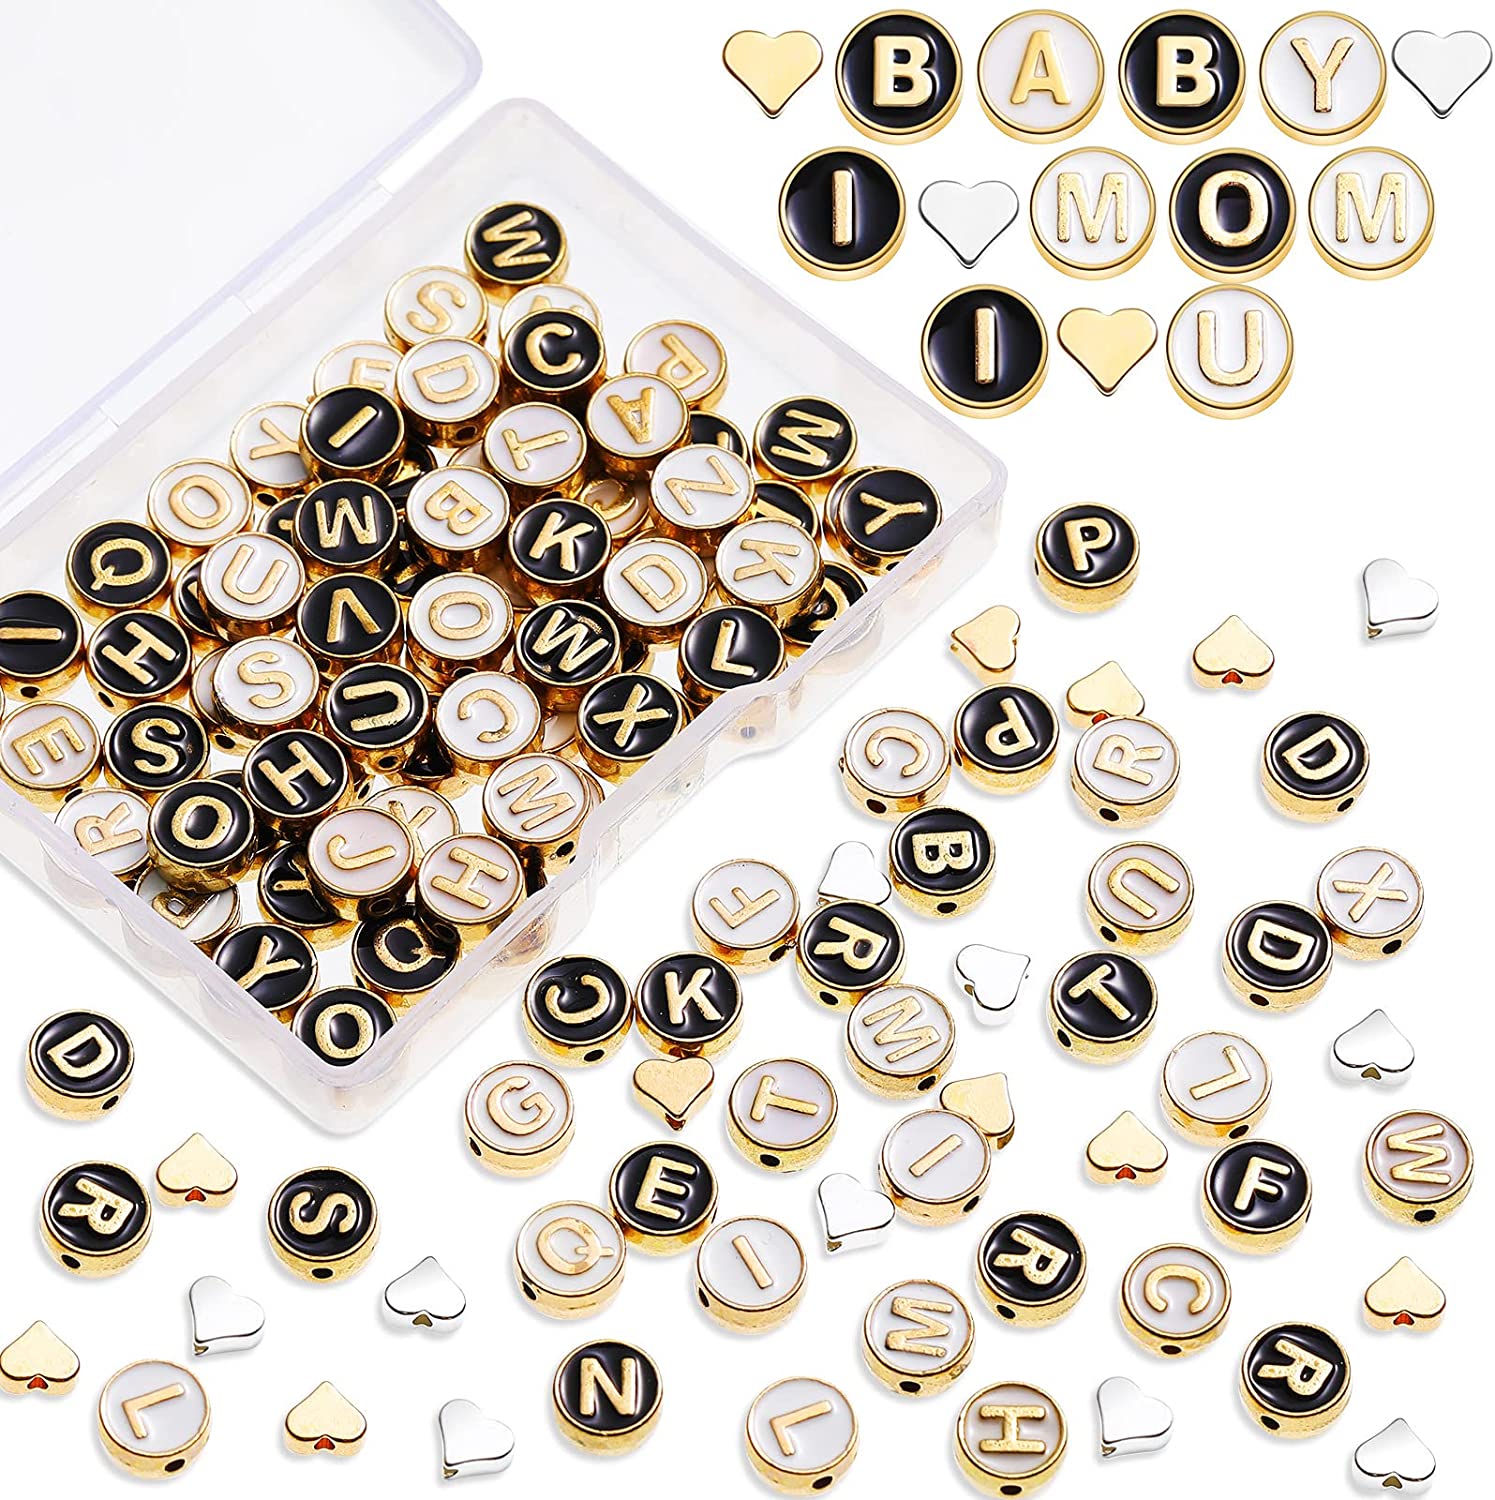 1200pcs, 4mm X 7mm Abs Resin Small Letter Beads, Round Alphabet Beads,  Colorful Acrylic With Gold Letters, For Jewelry Making (colorful Beads With  Gold Letters),comes With Clear Elastic Cord